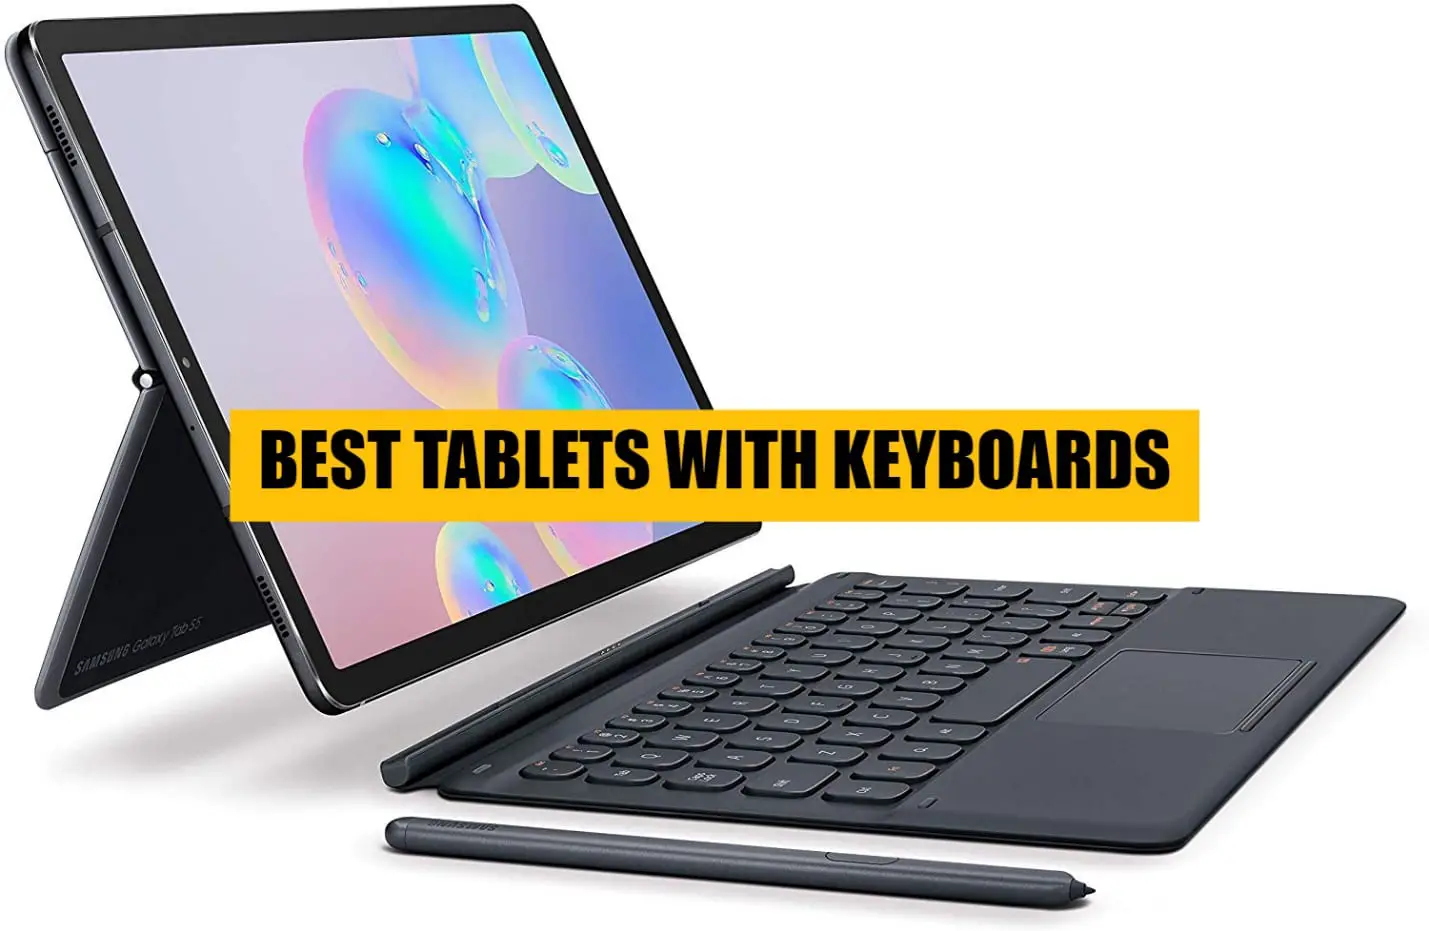 BEST TABLET WITH KEYBOARD